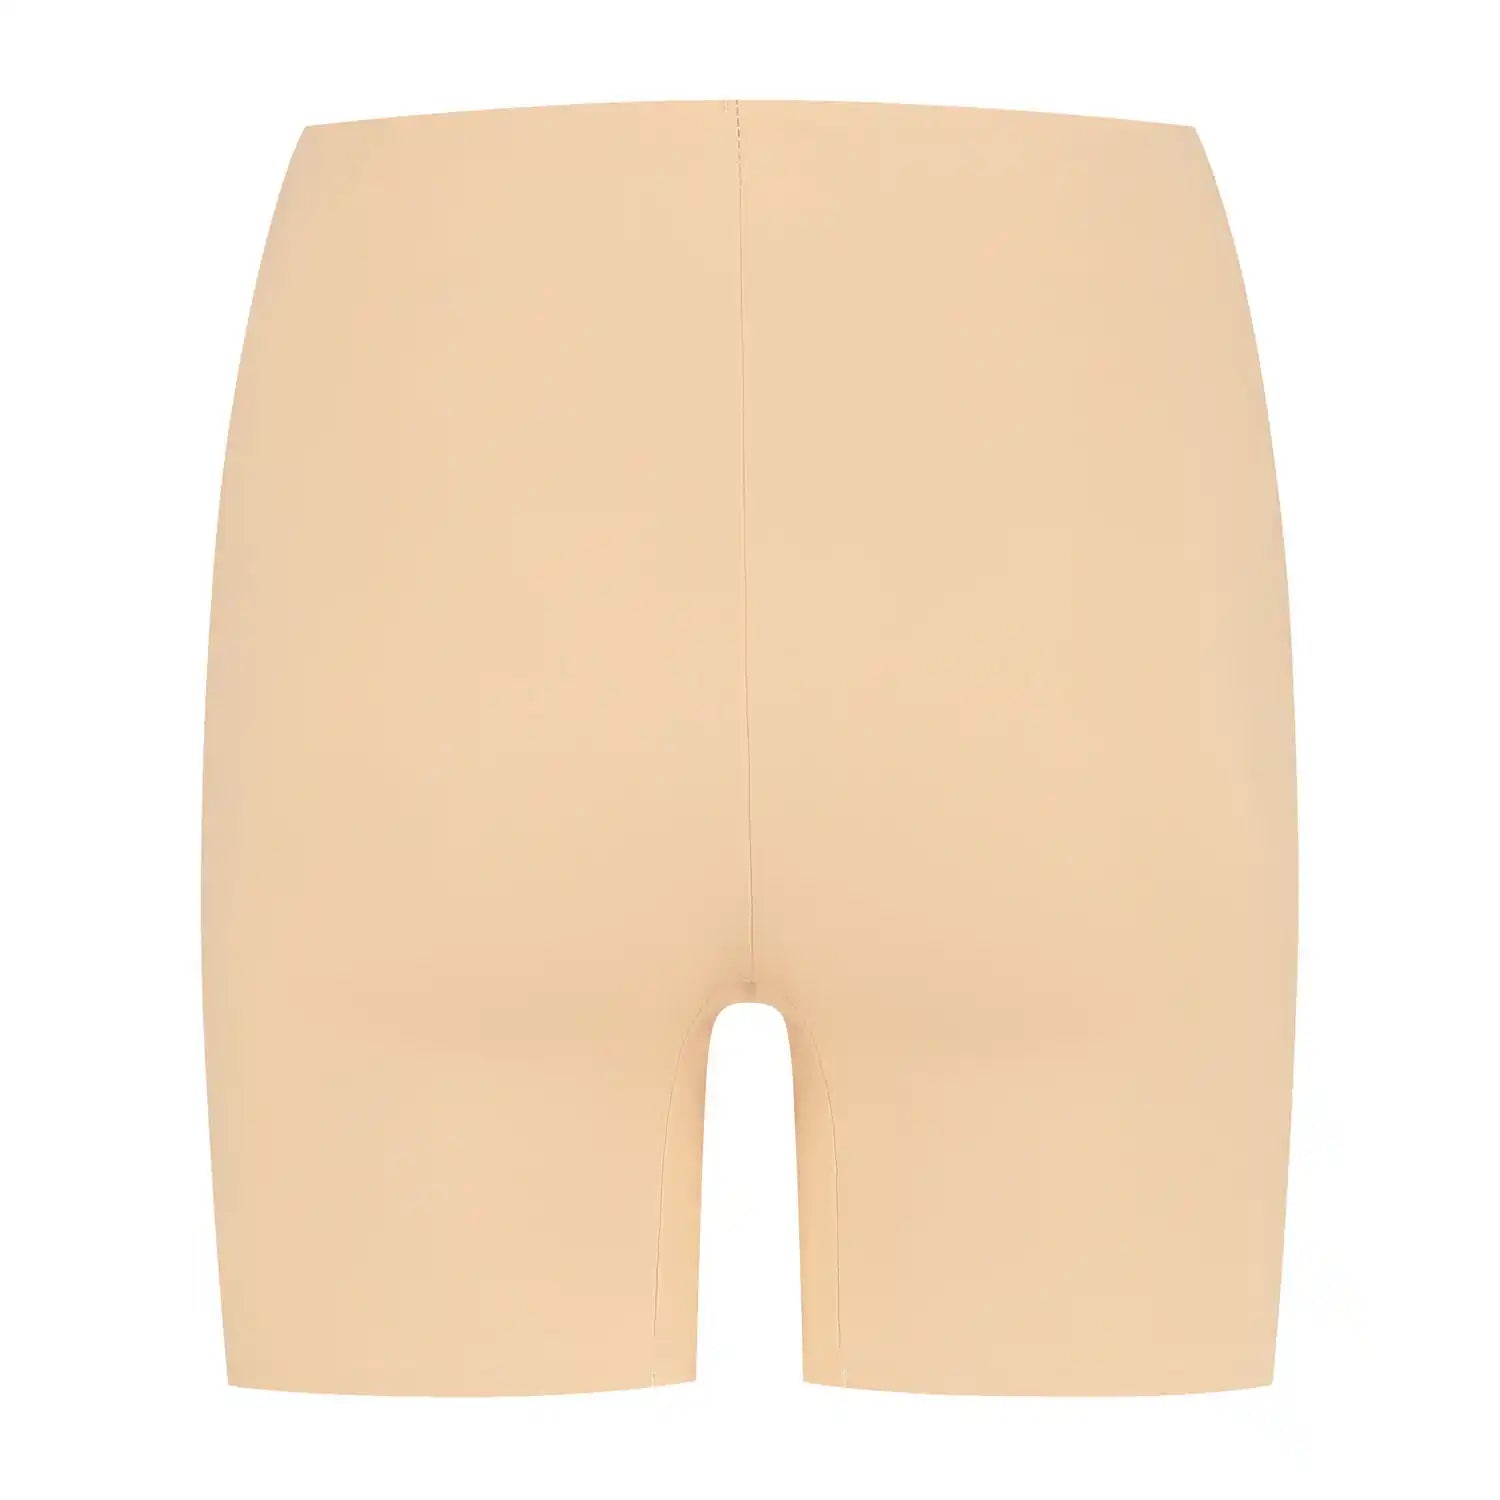 Bye Bra Invisible Short - Beige 2 Shaws Department Stores